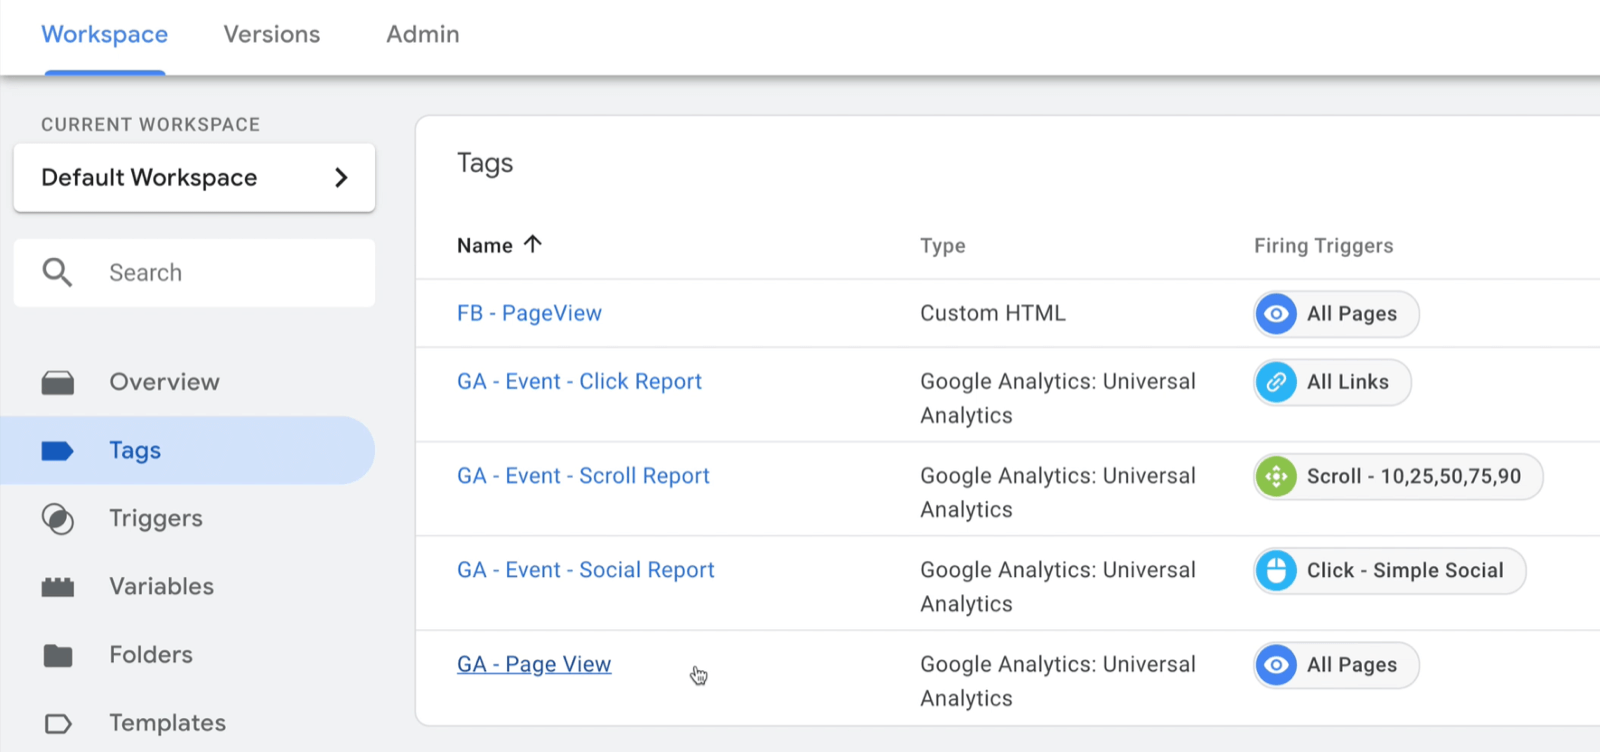 example google tag manager dashboard workspace with tags selected and several example tags shown with type and firing trigger noted for each